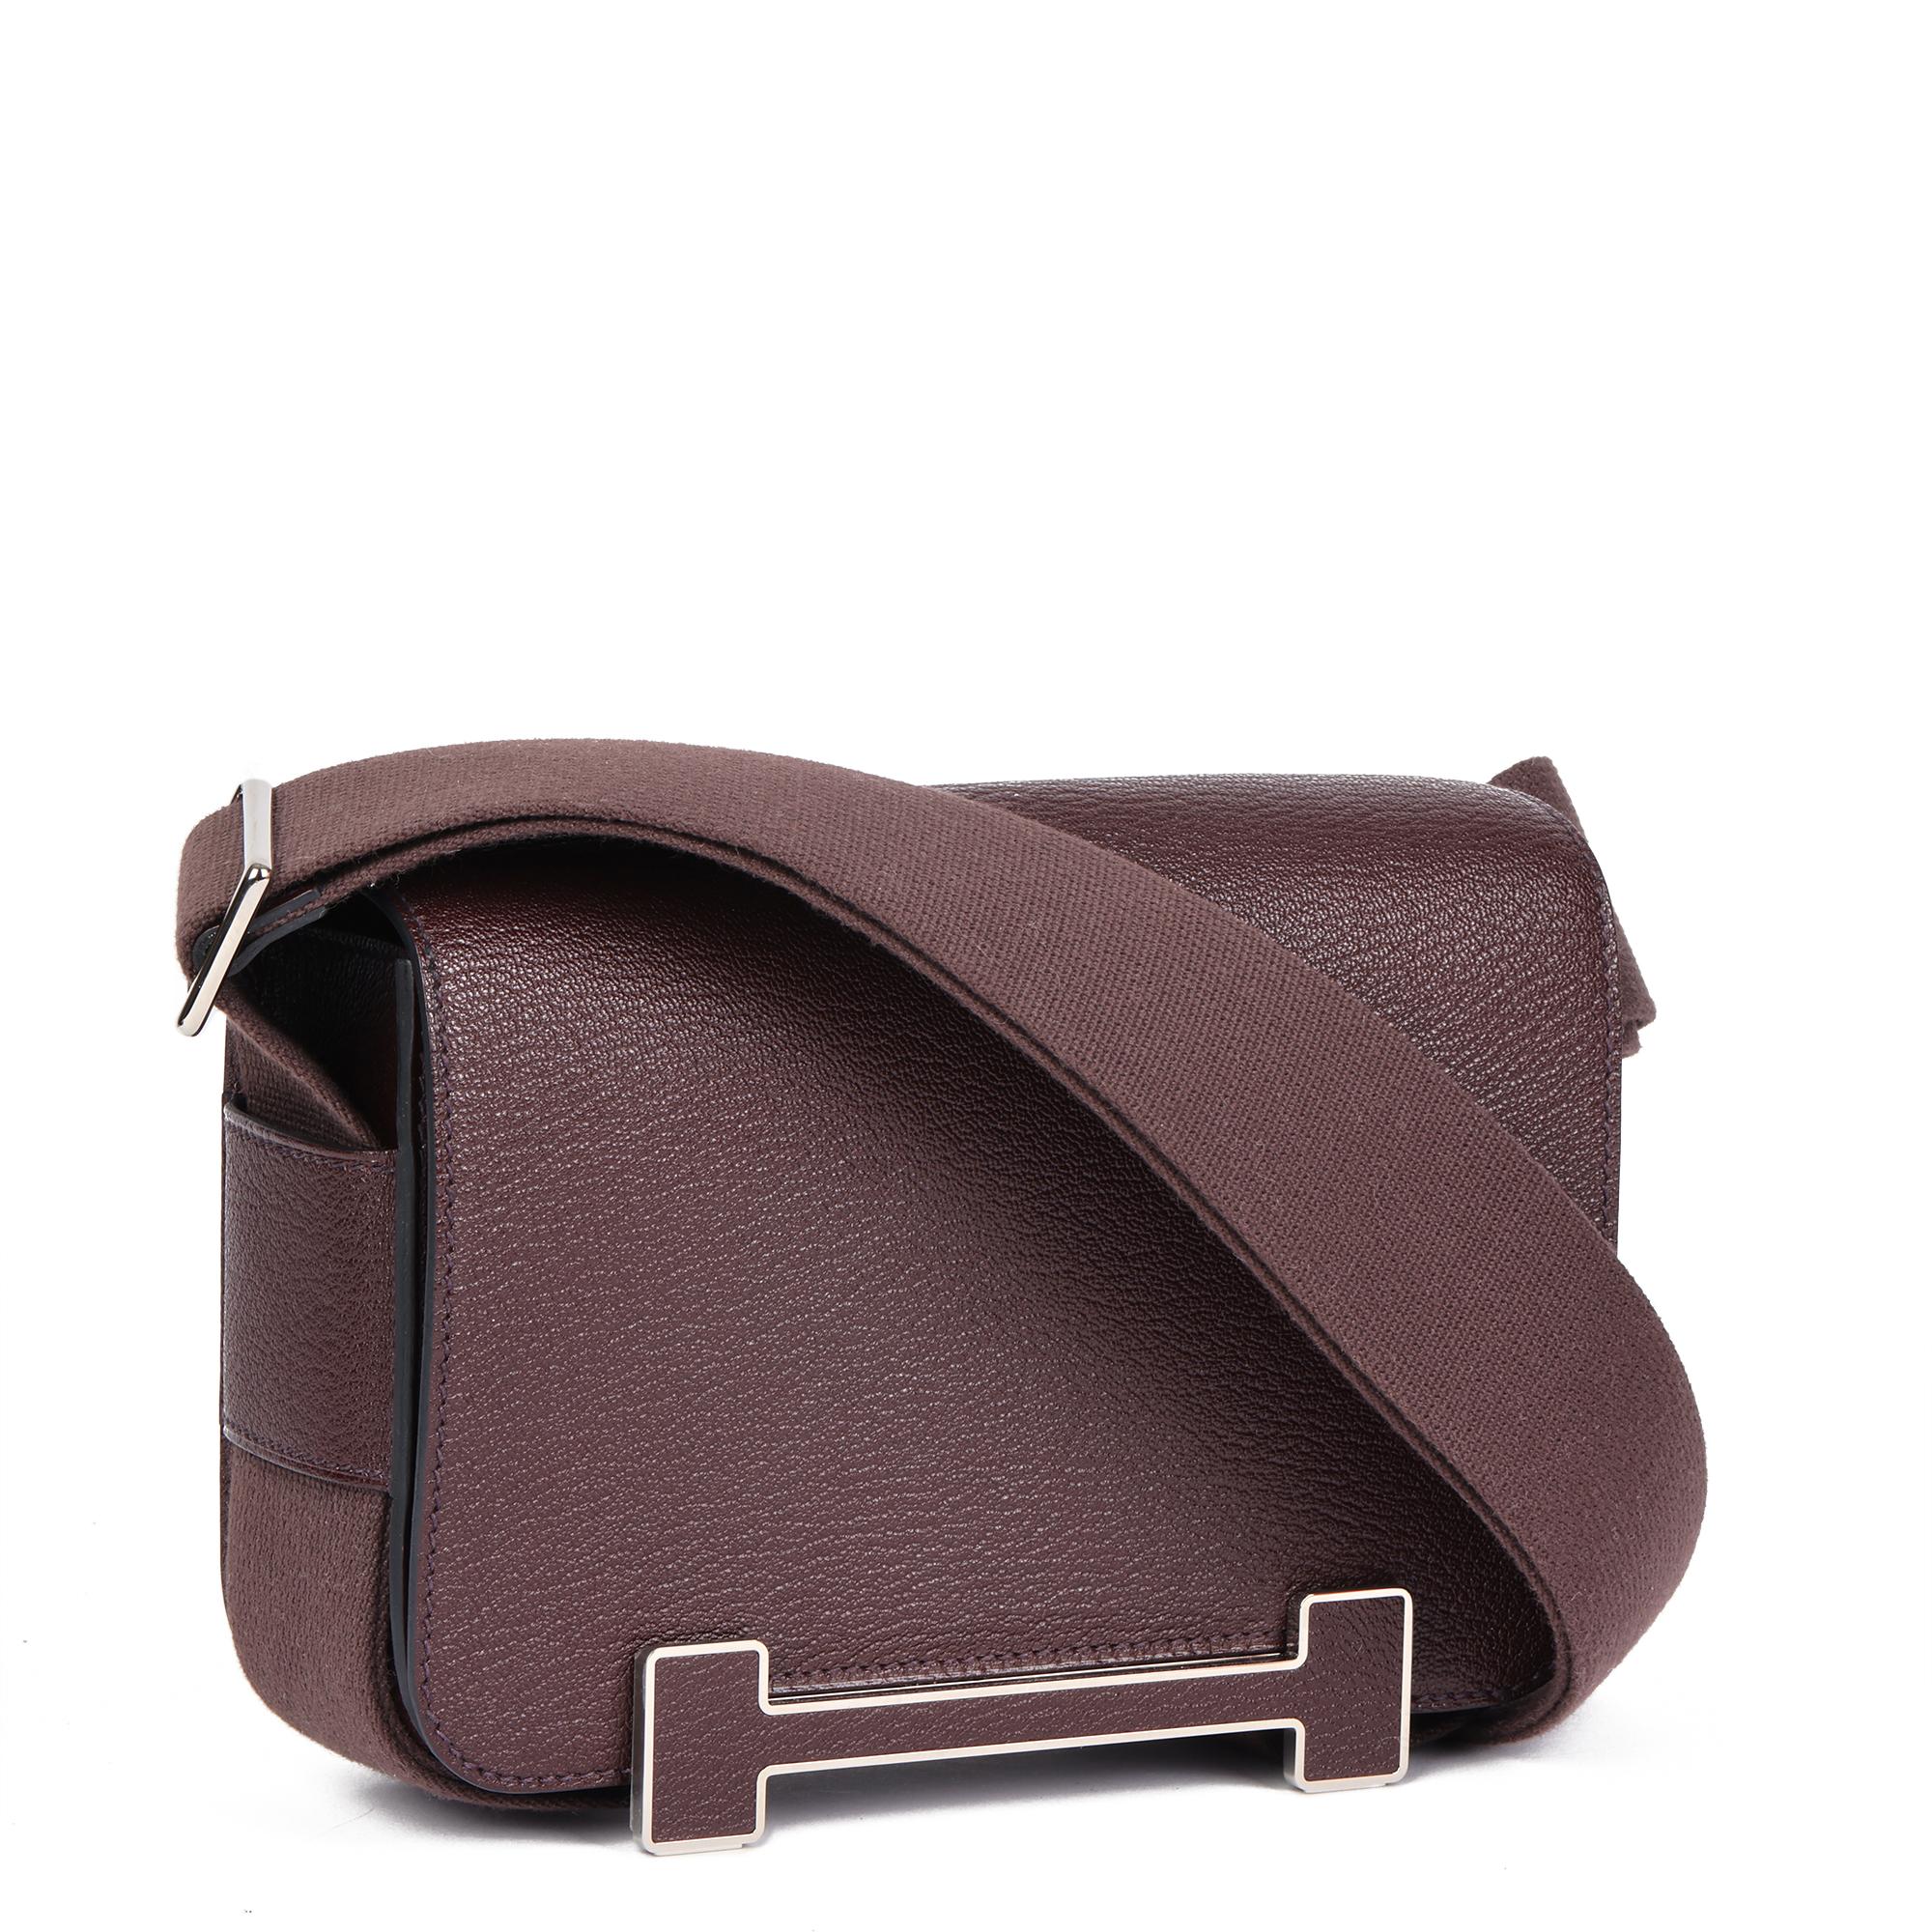 HERMÈS
Rouge Sellier Chevre Mysore Leather Geta

Serial Number: U
Age (Circa): 2022
Accompanied By: Hermès Dust Bag, Box, Care Booklet,Protective Felt
Authenticity Details: Date Stamp (Made in France)
Gender: Ladies
Type: Shoulder,